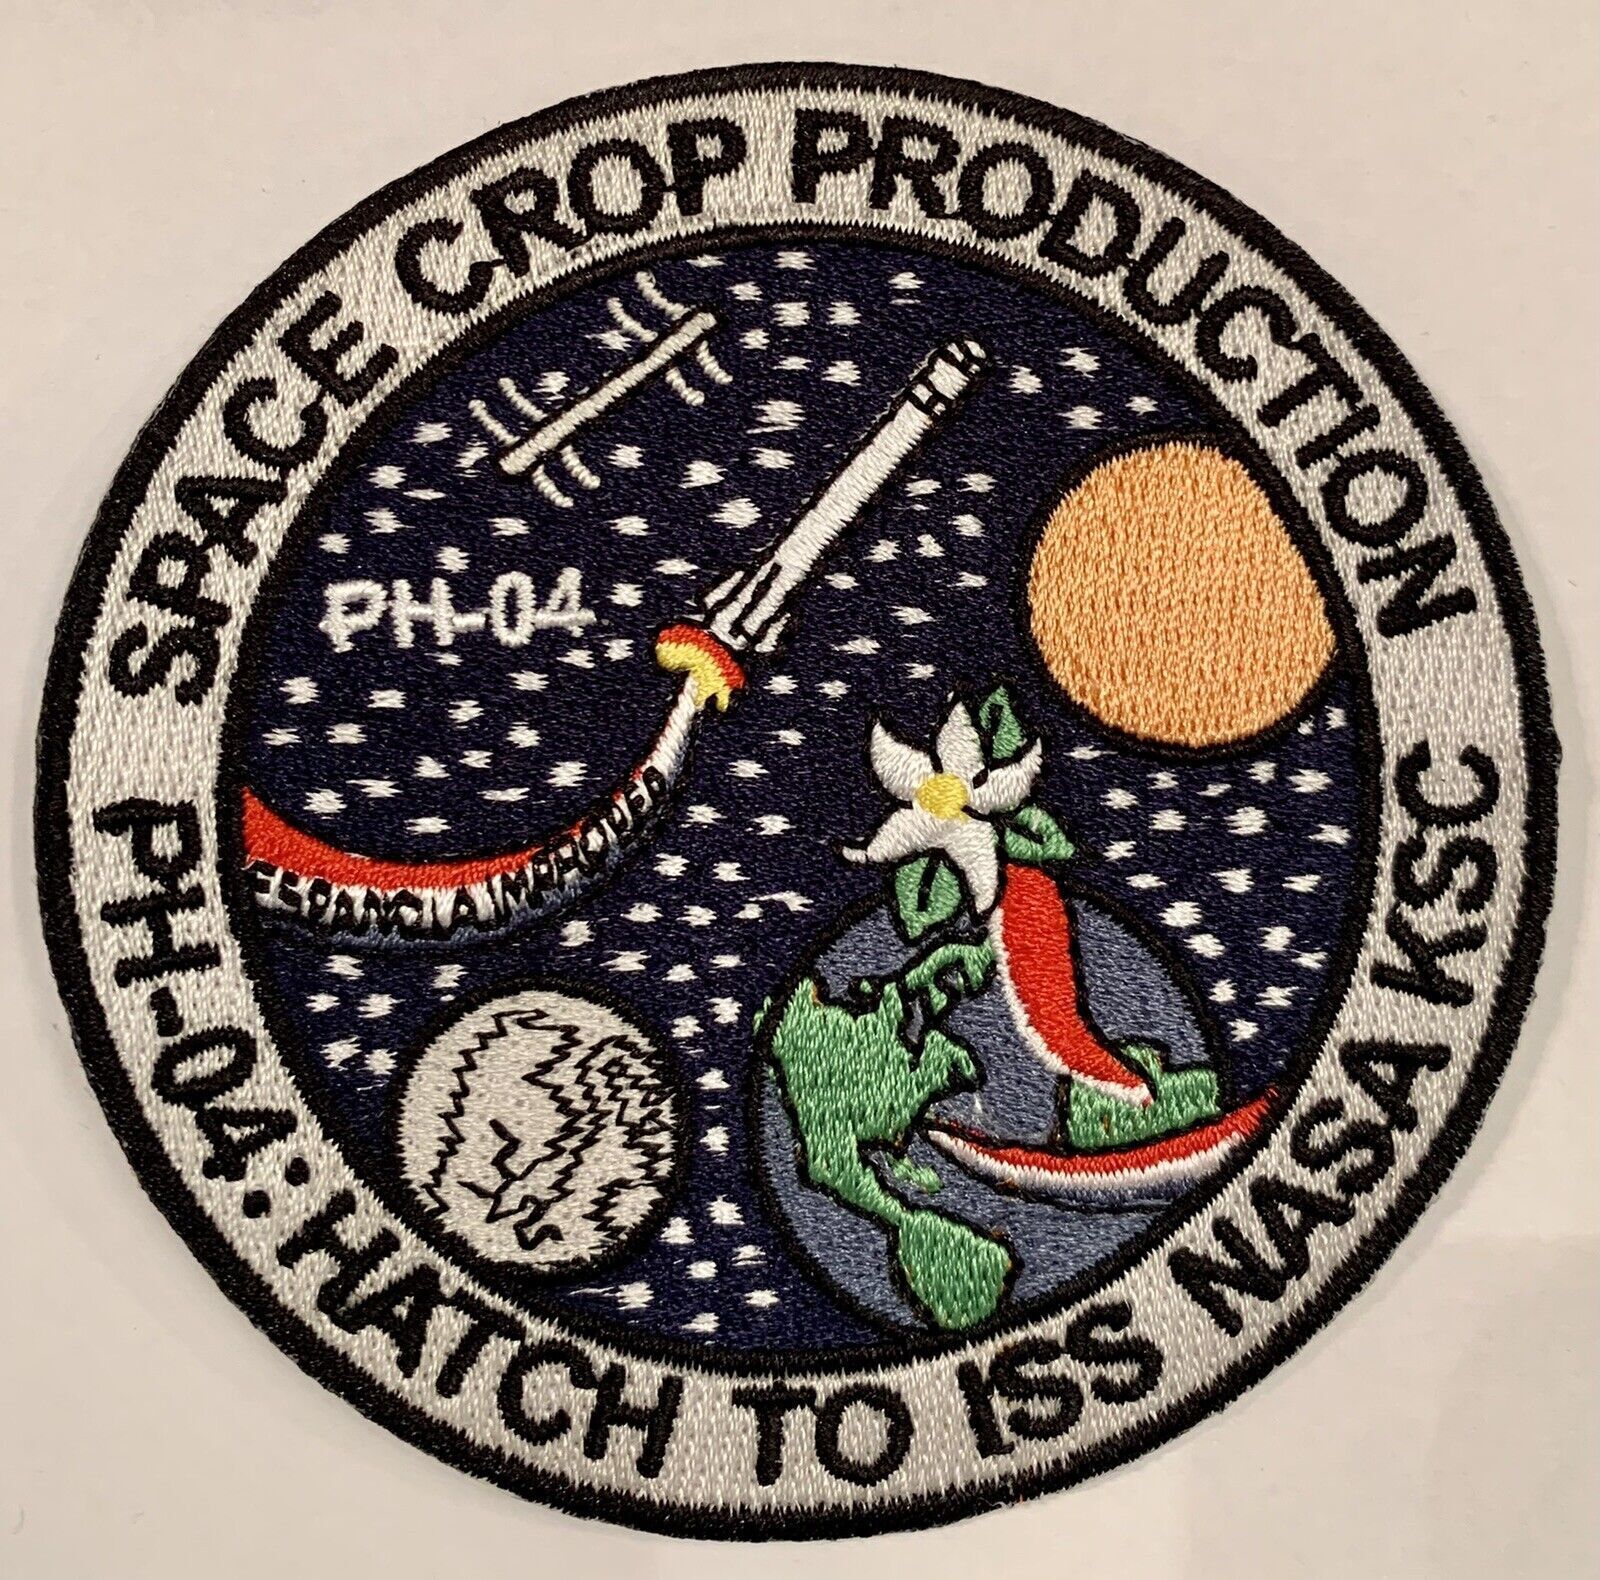 Original NASA ISS Space Crop Production Mission Patch 3.5”